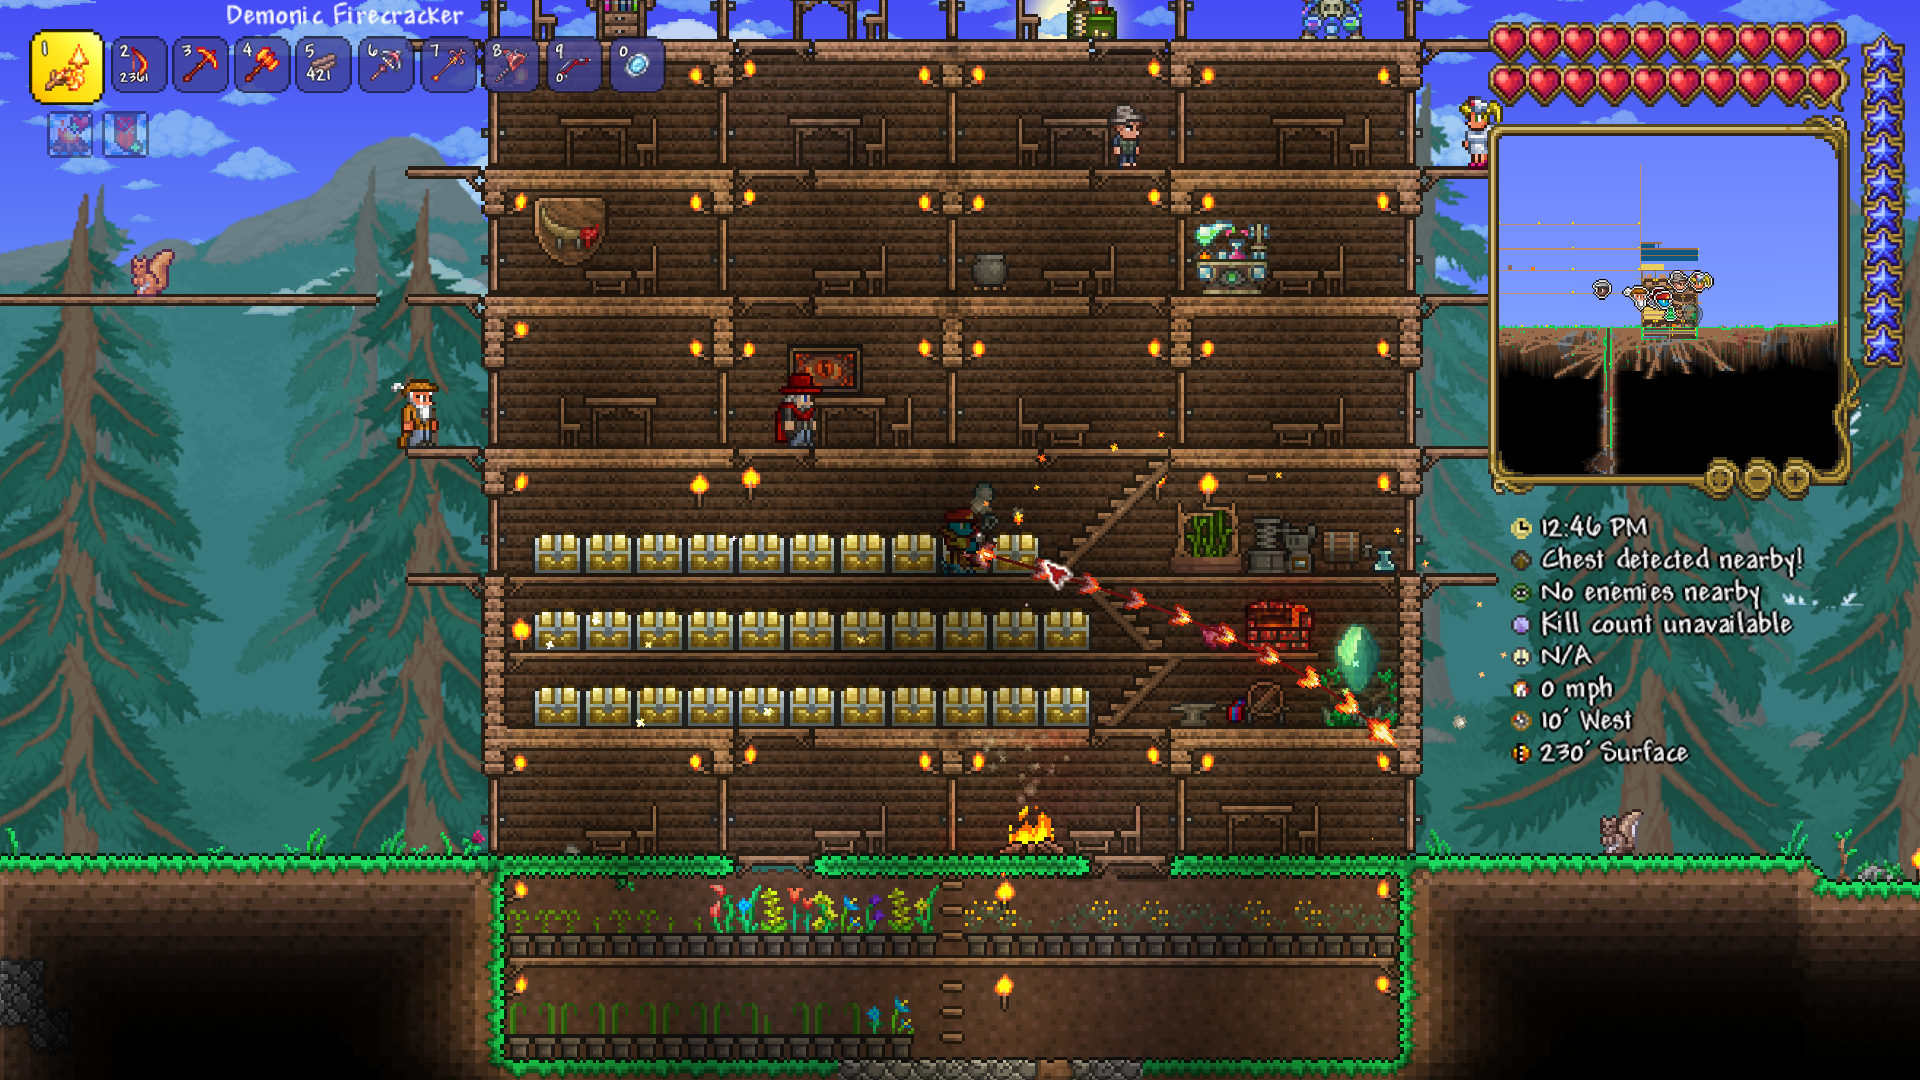 Terraria base with a grid of rectangular rooms made of wood in a forest biome. NPCs live in various rooms with the central chest area in the center.